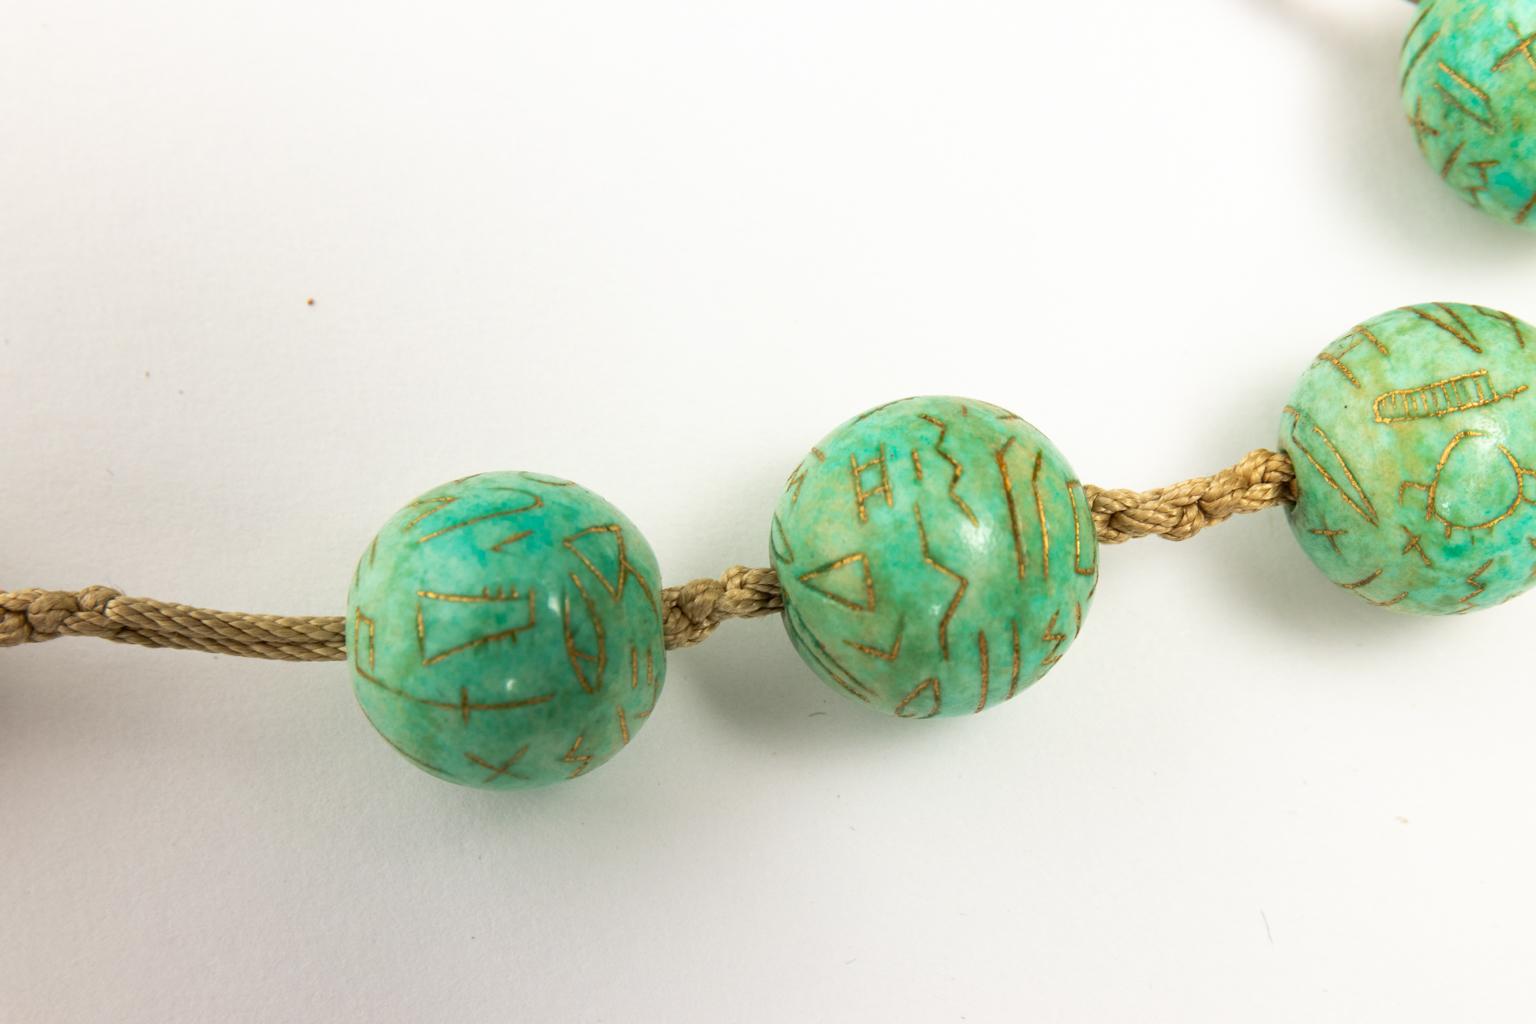 Circa 1918 Egyptian Revival style Turquoise colored Faience pendant with a knotted bead chain and gold detail. This piece also has a pendant which is detachable to be worn as a standalone piece.
